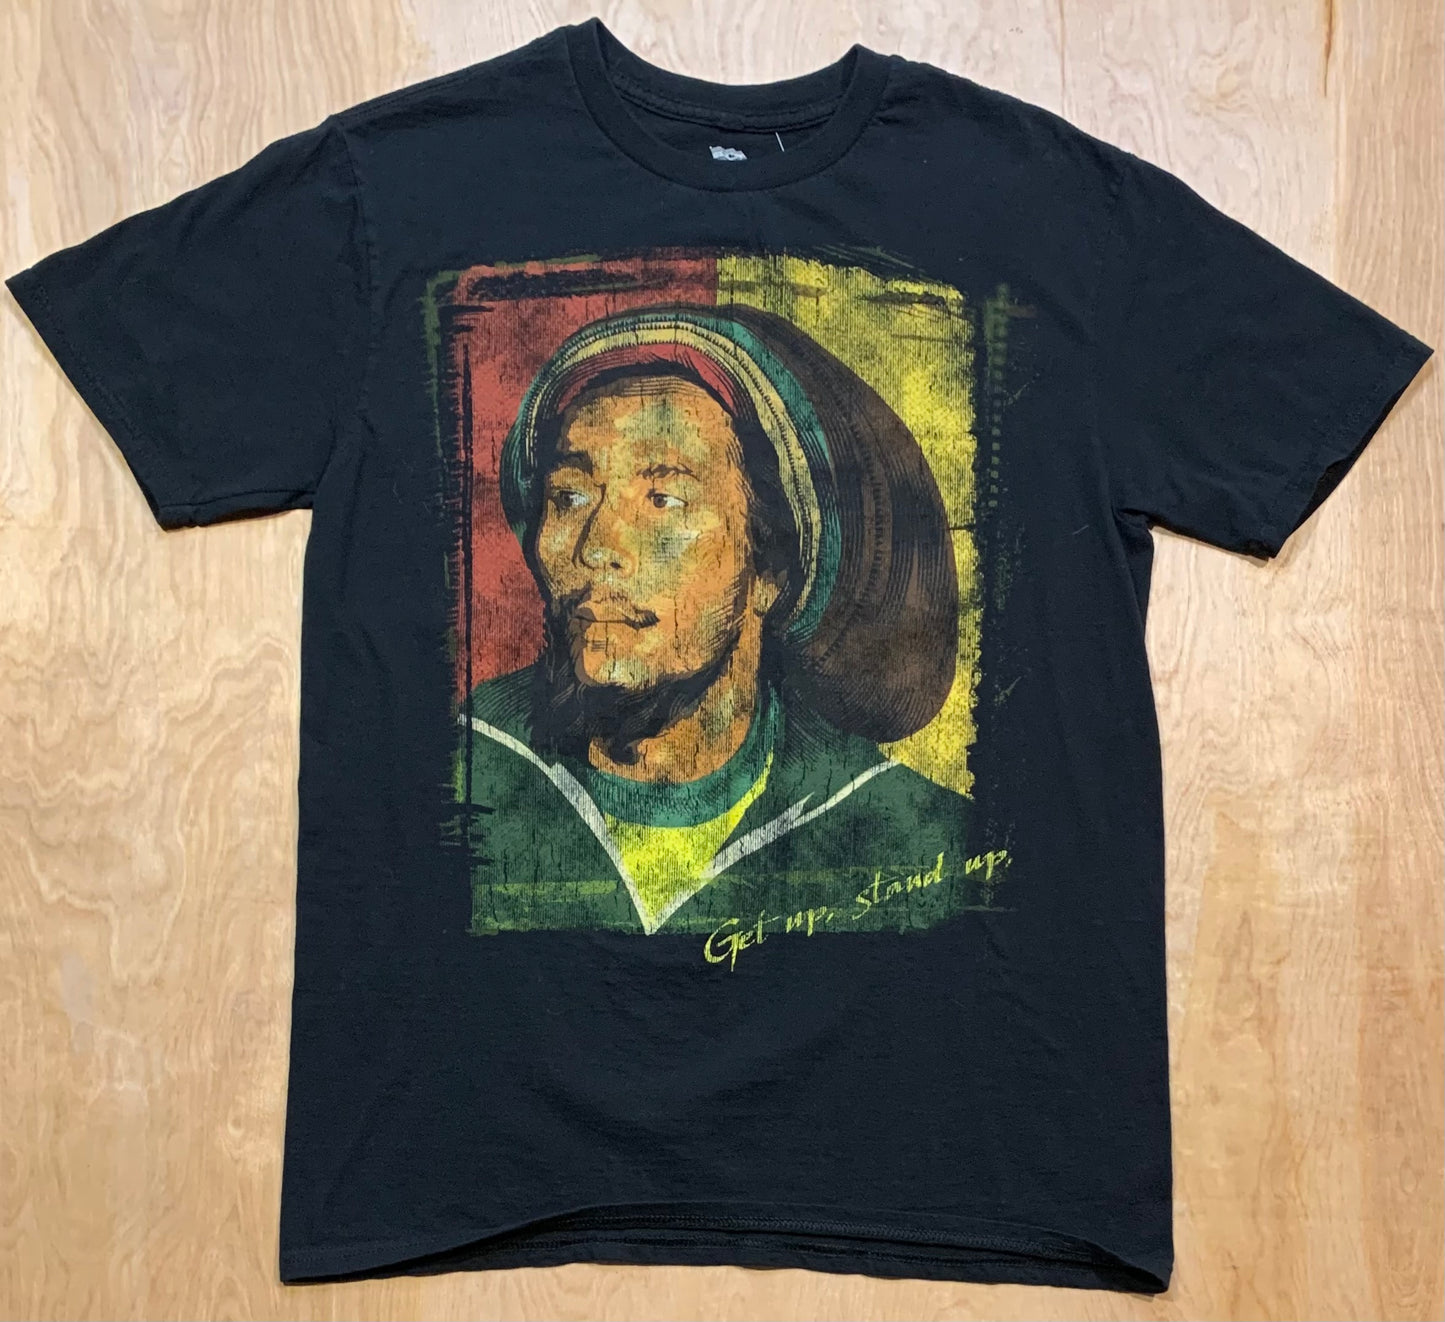 Bob Marley "Get up, Stand up" Graphic T-Shirt